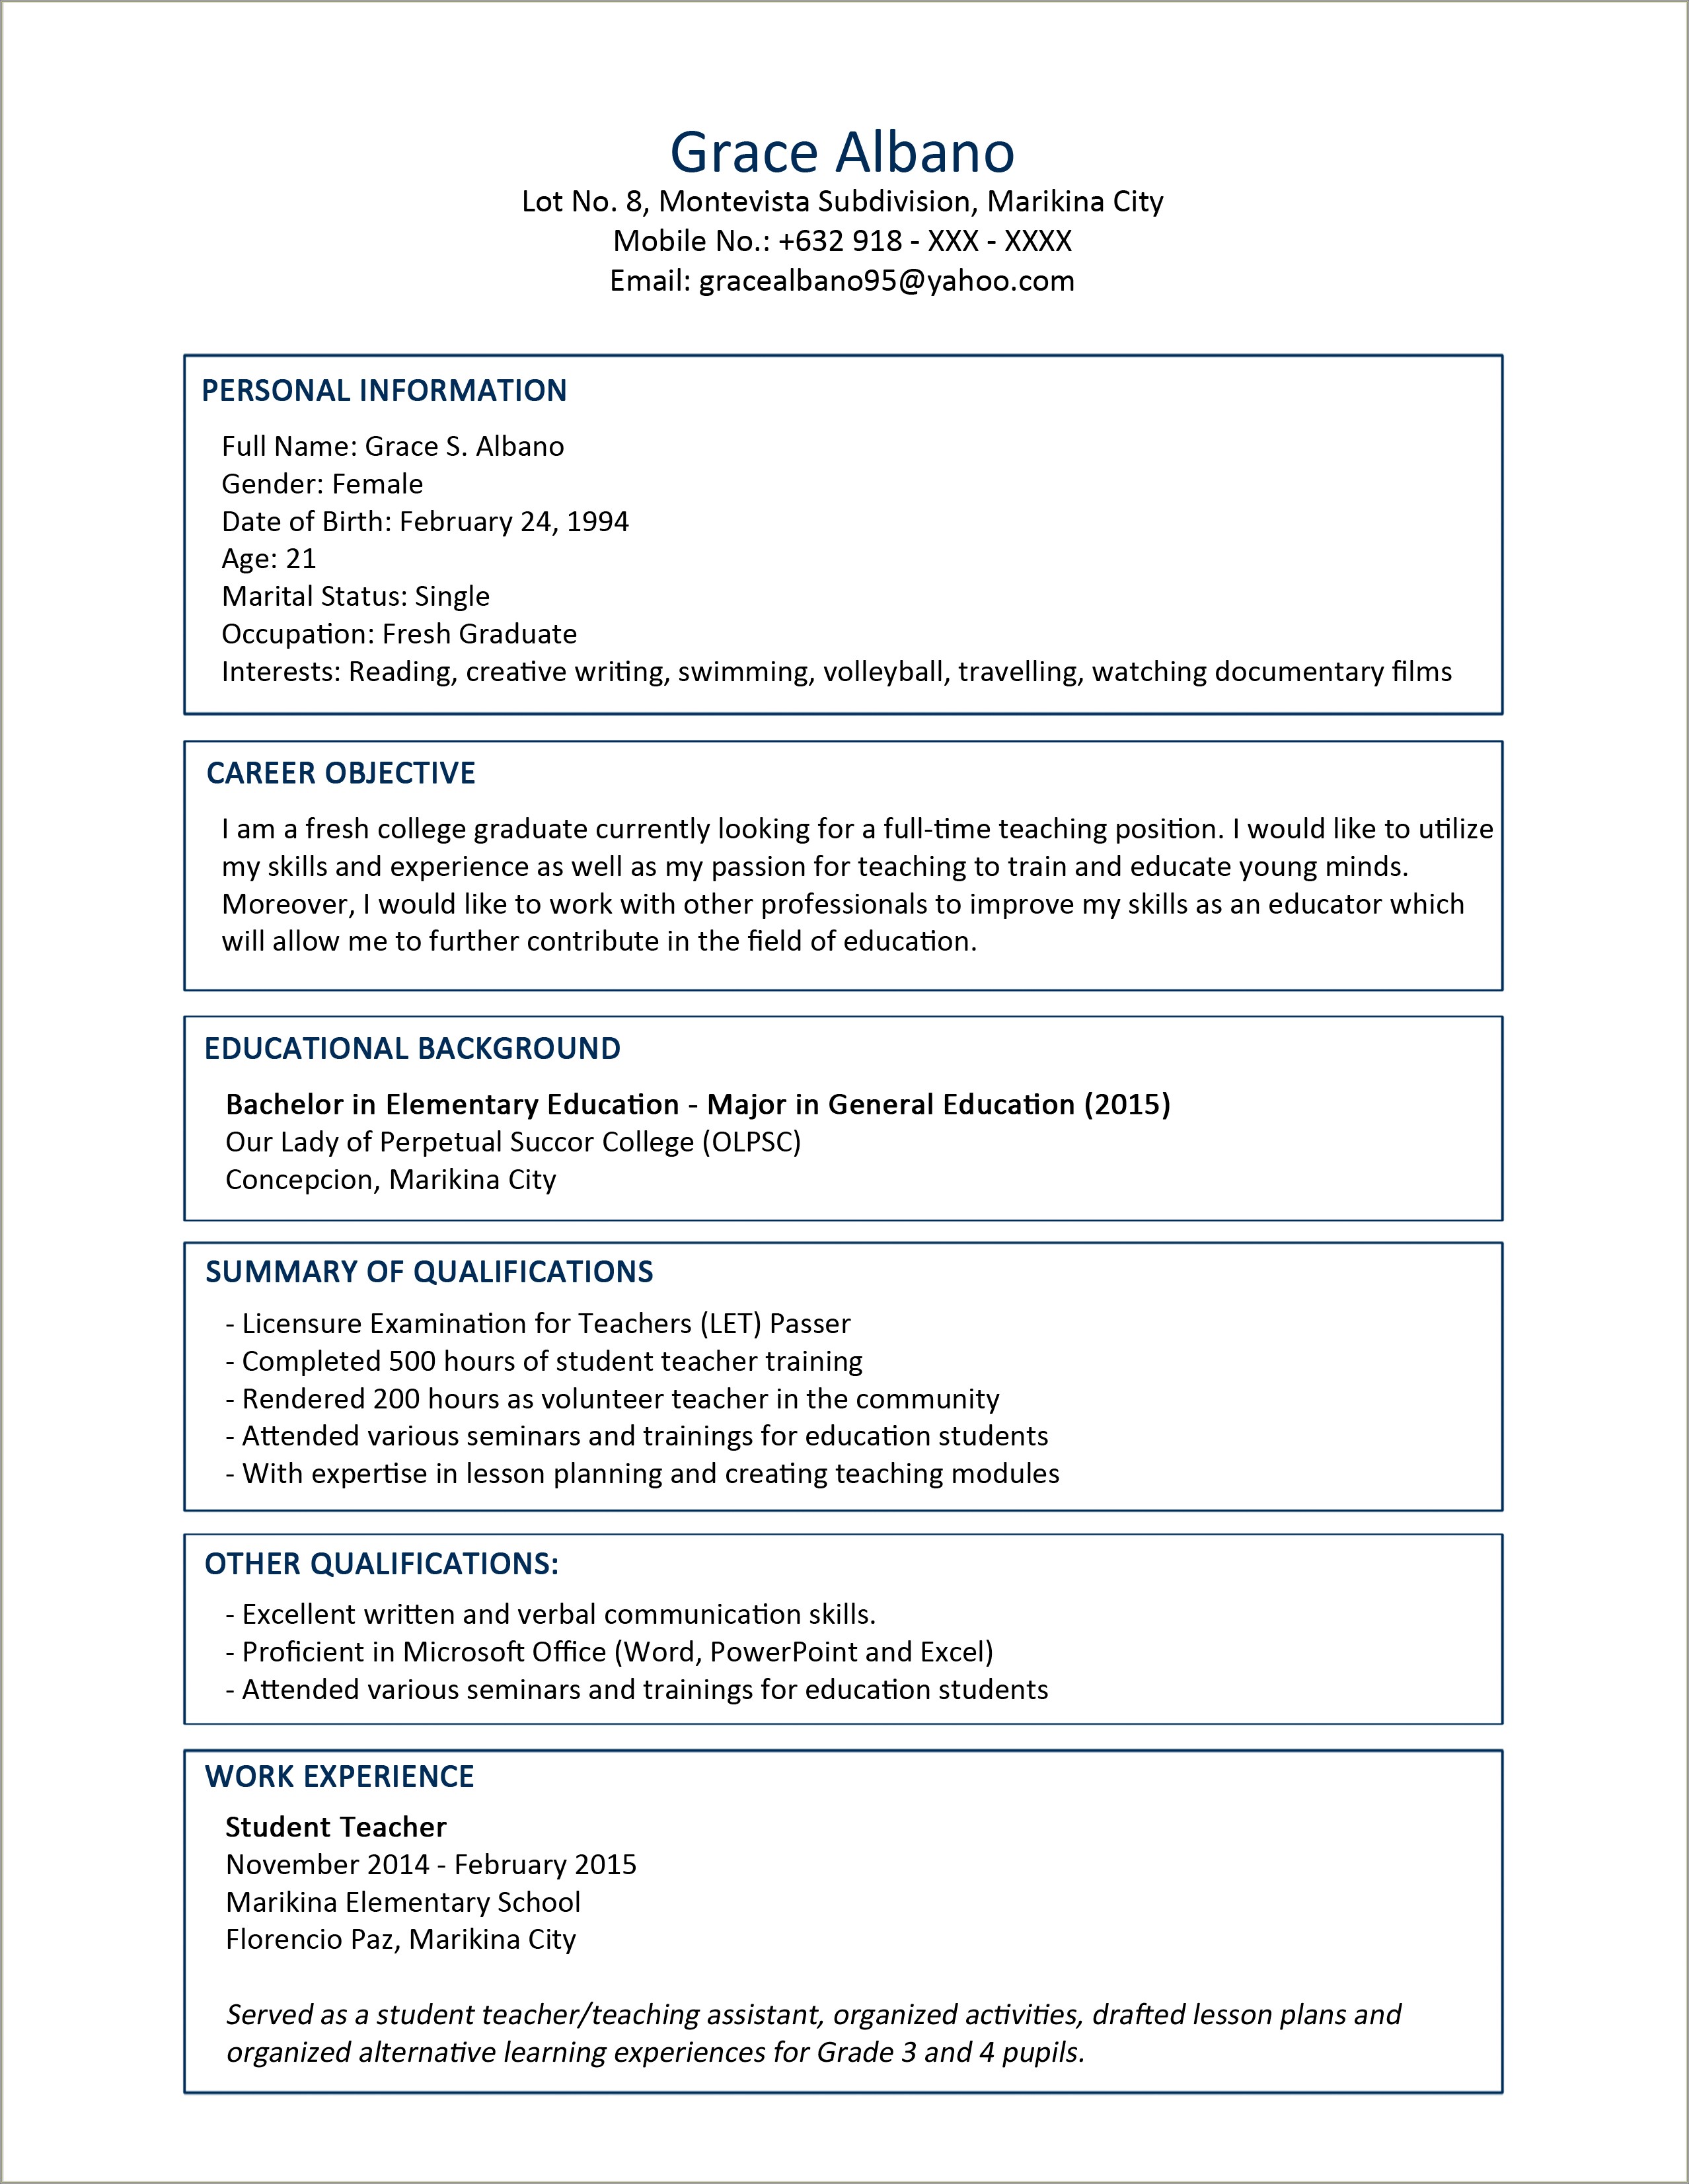 Resume Objective For Fresh Graduates Examples